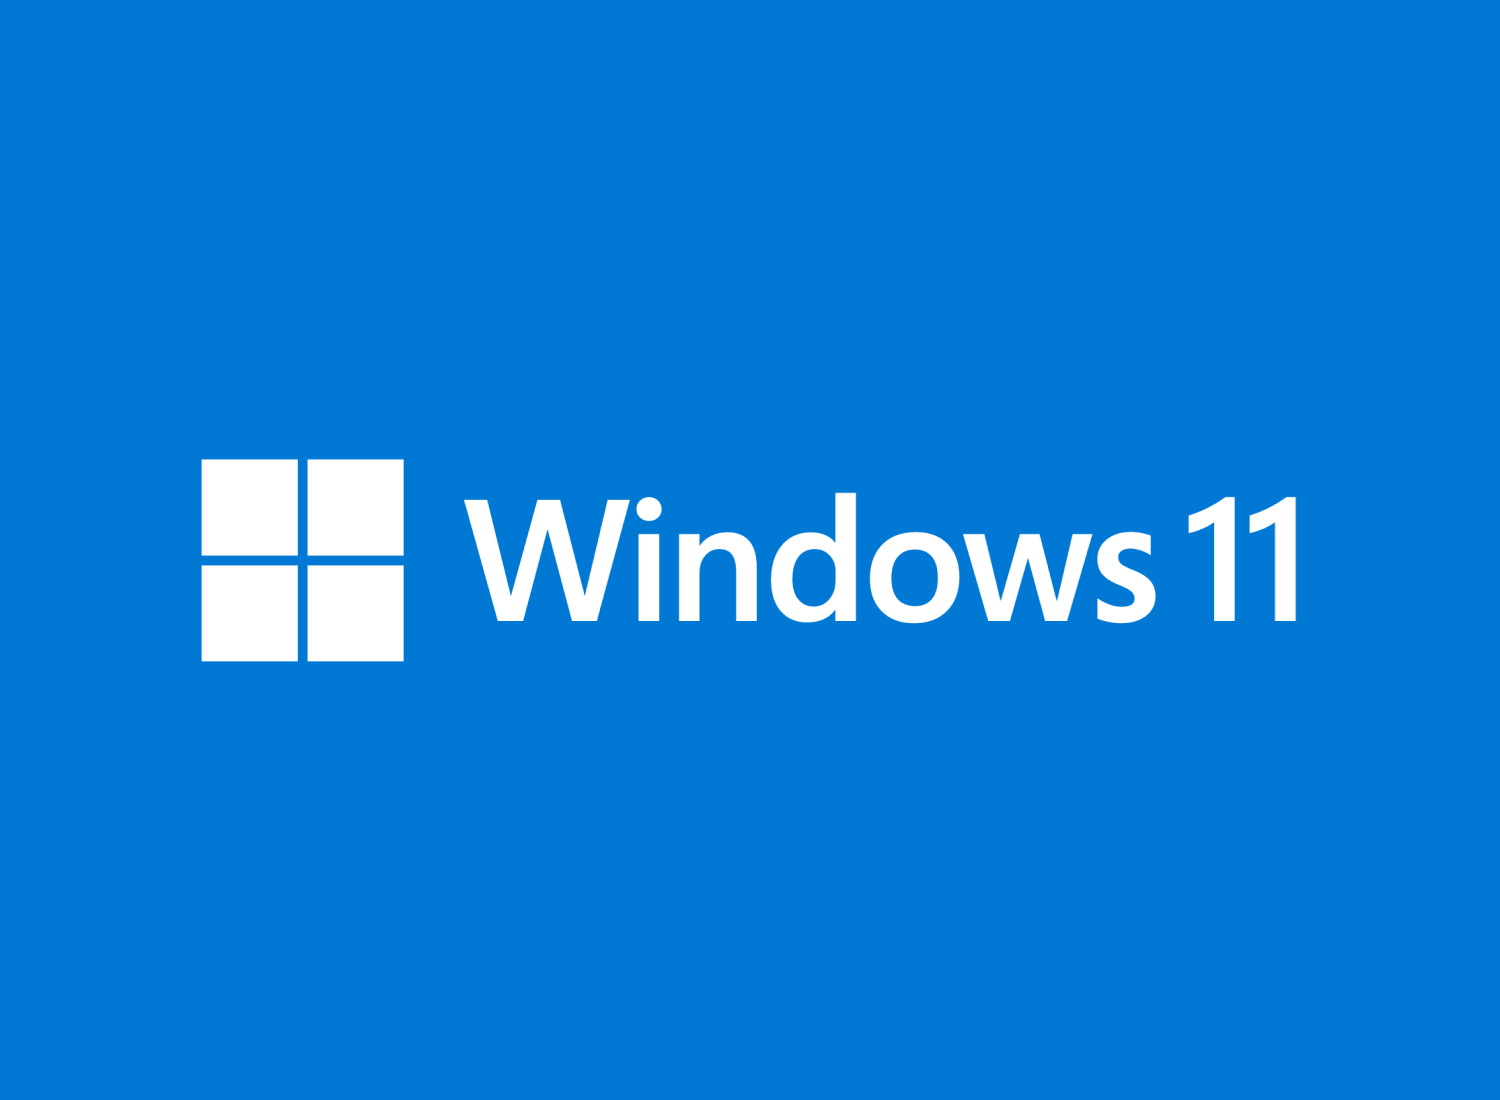 Announcing Windows 10 Insider Preview Build 19044.1200 (21H2)